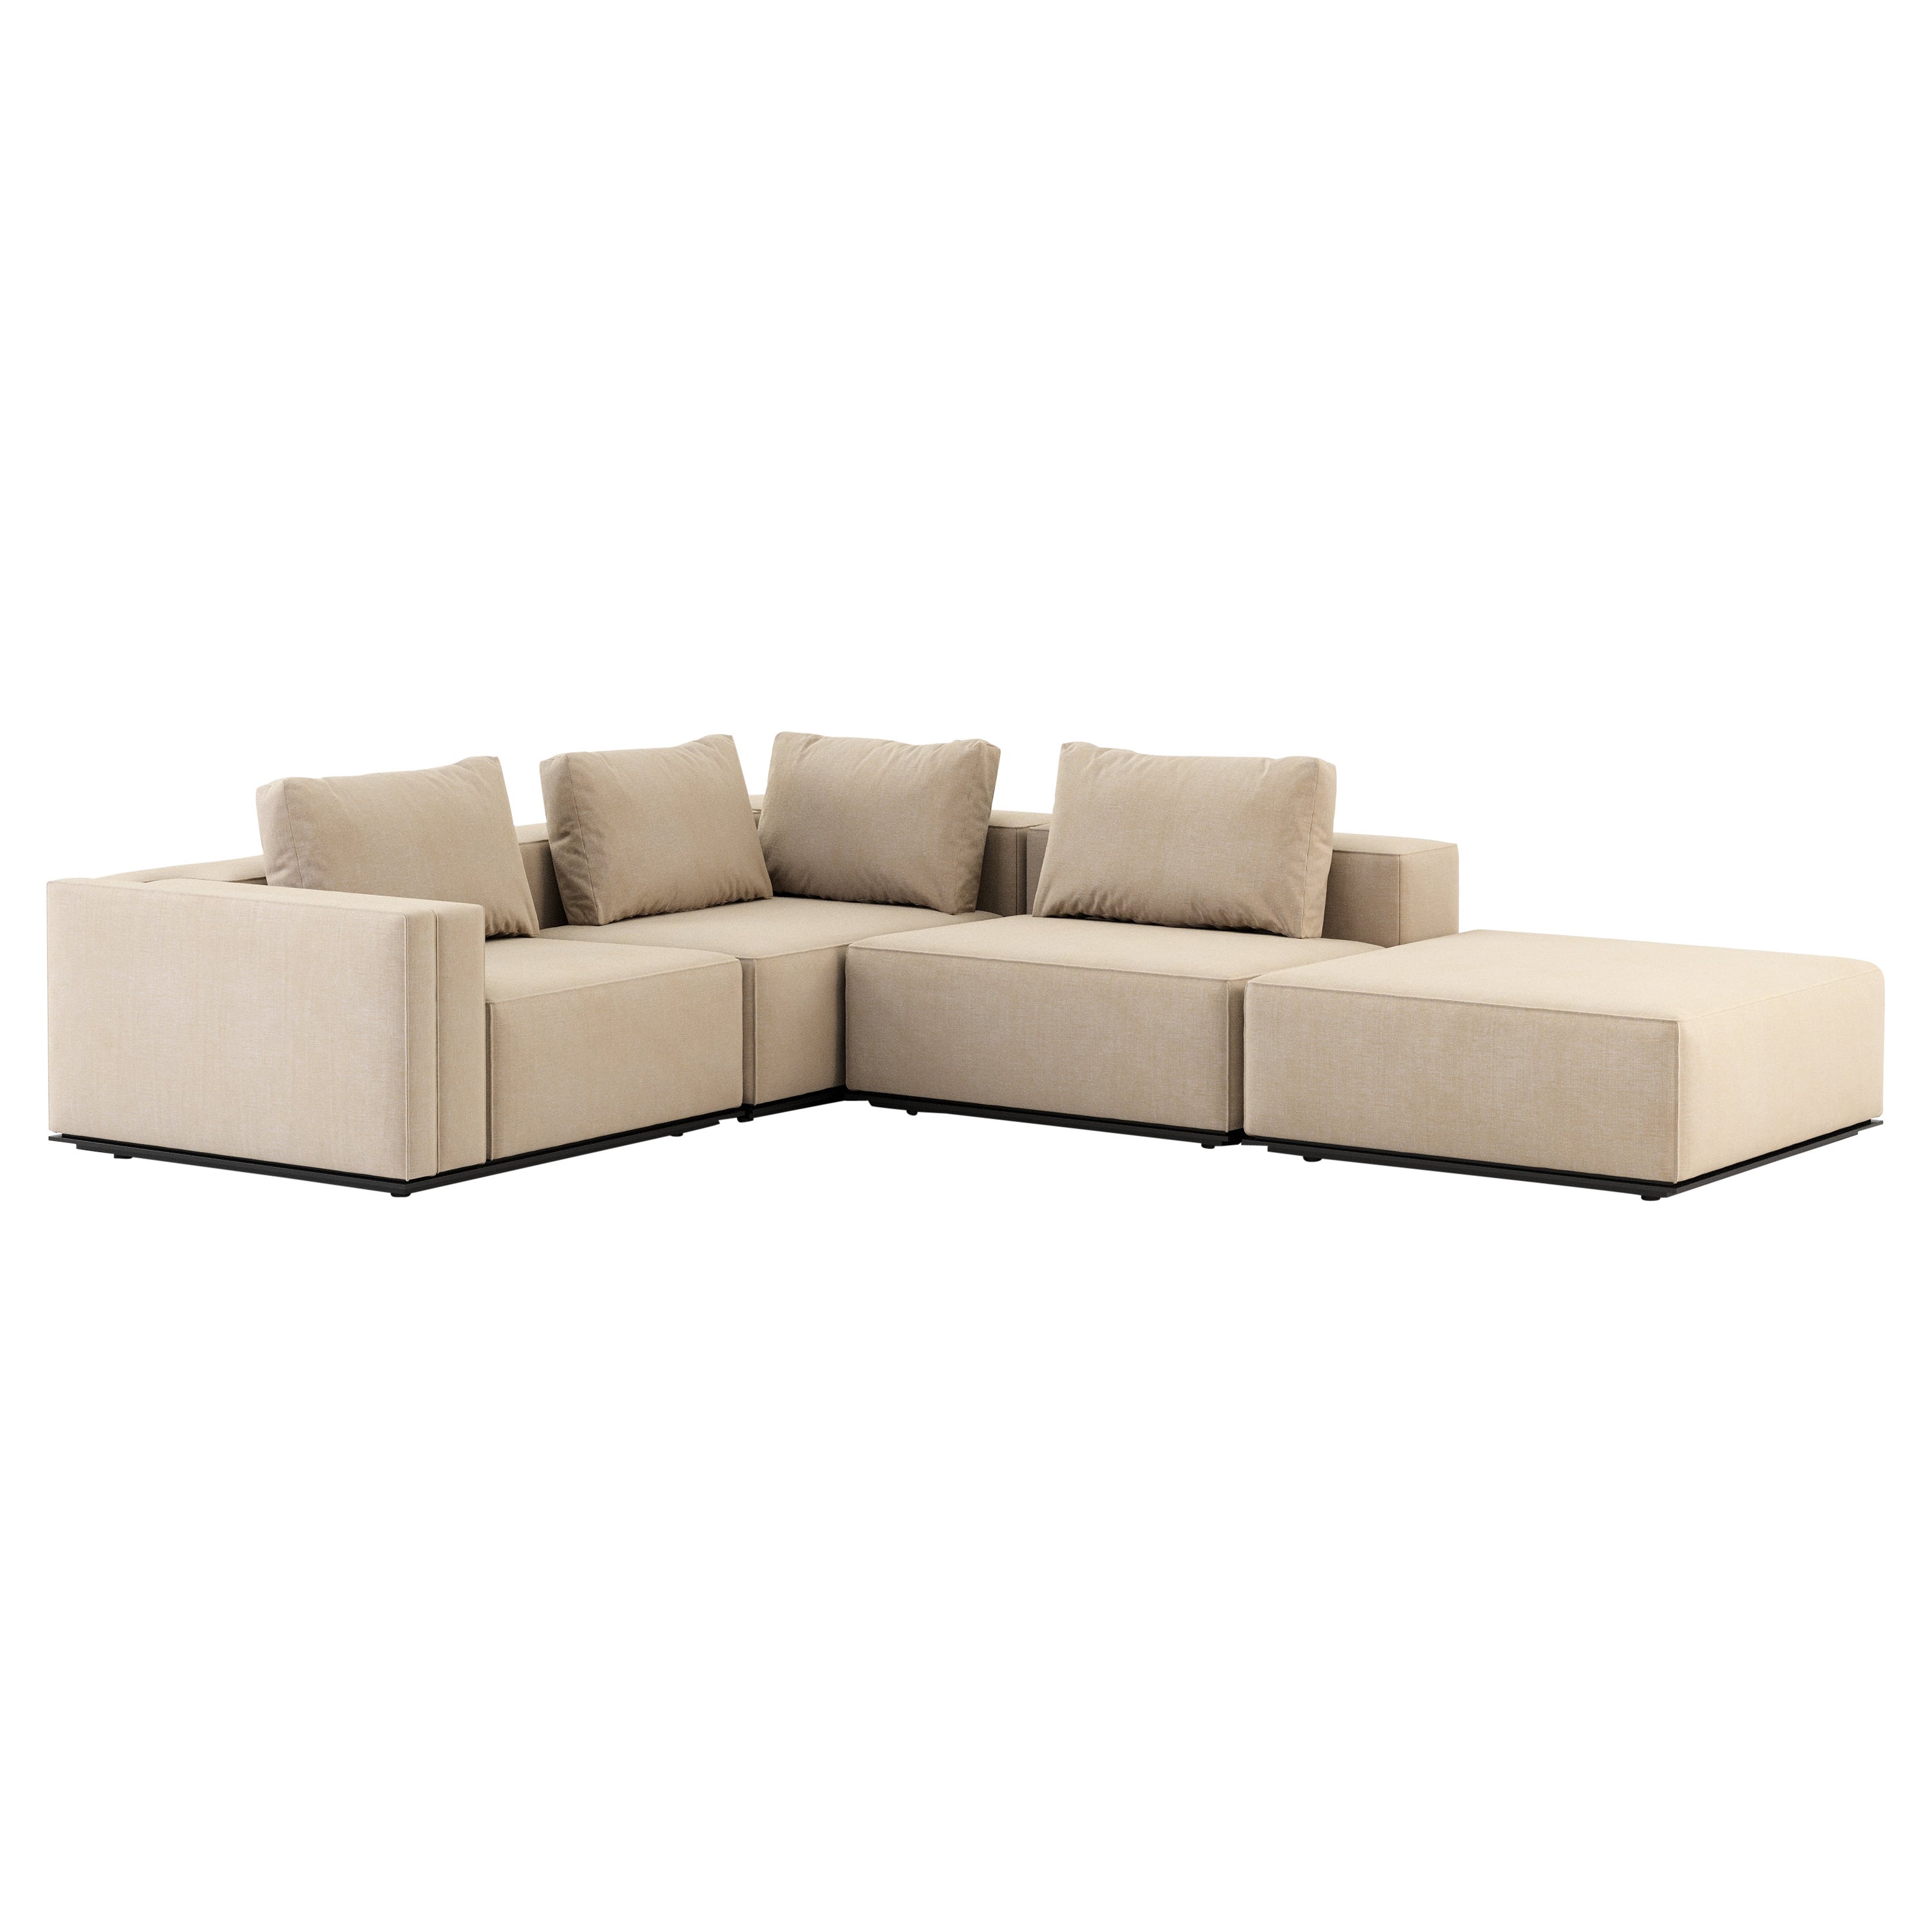 Scandinavian 3 Seats with Chaise Lounge Landform Sofa Made with Wood and Textile